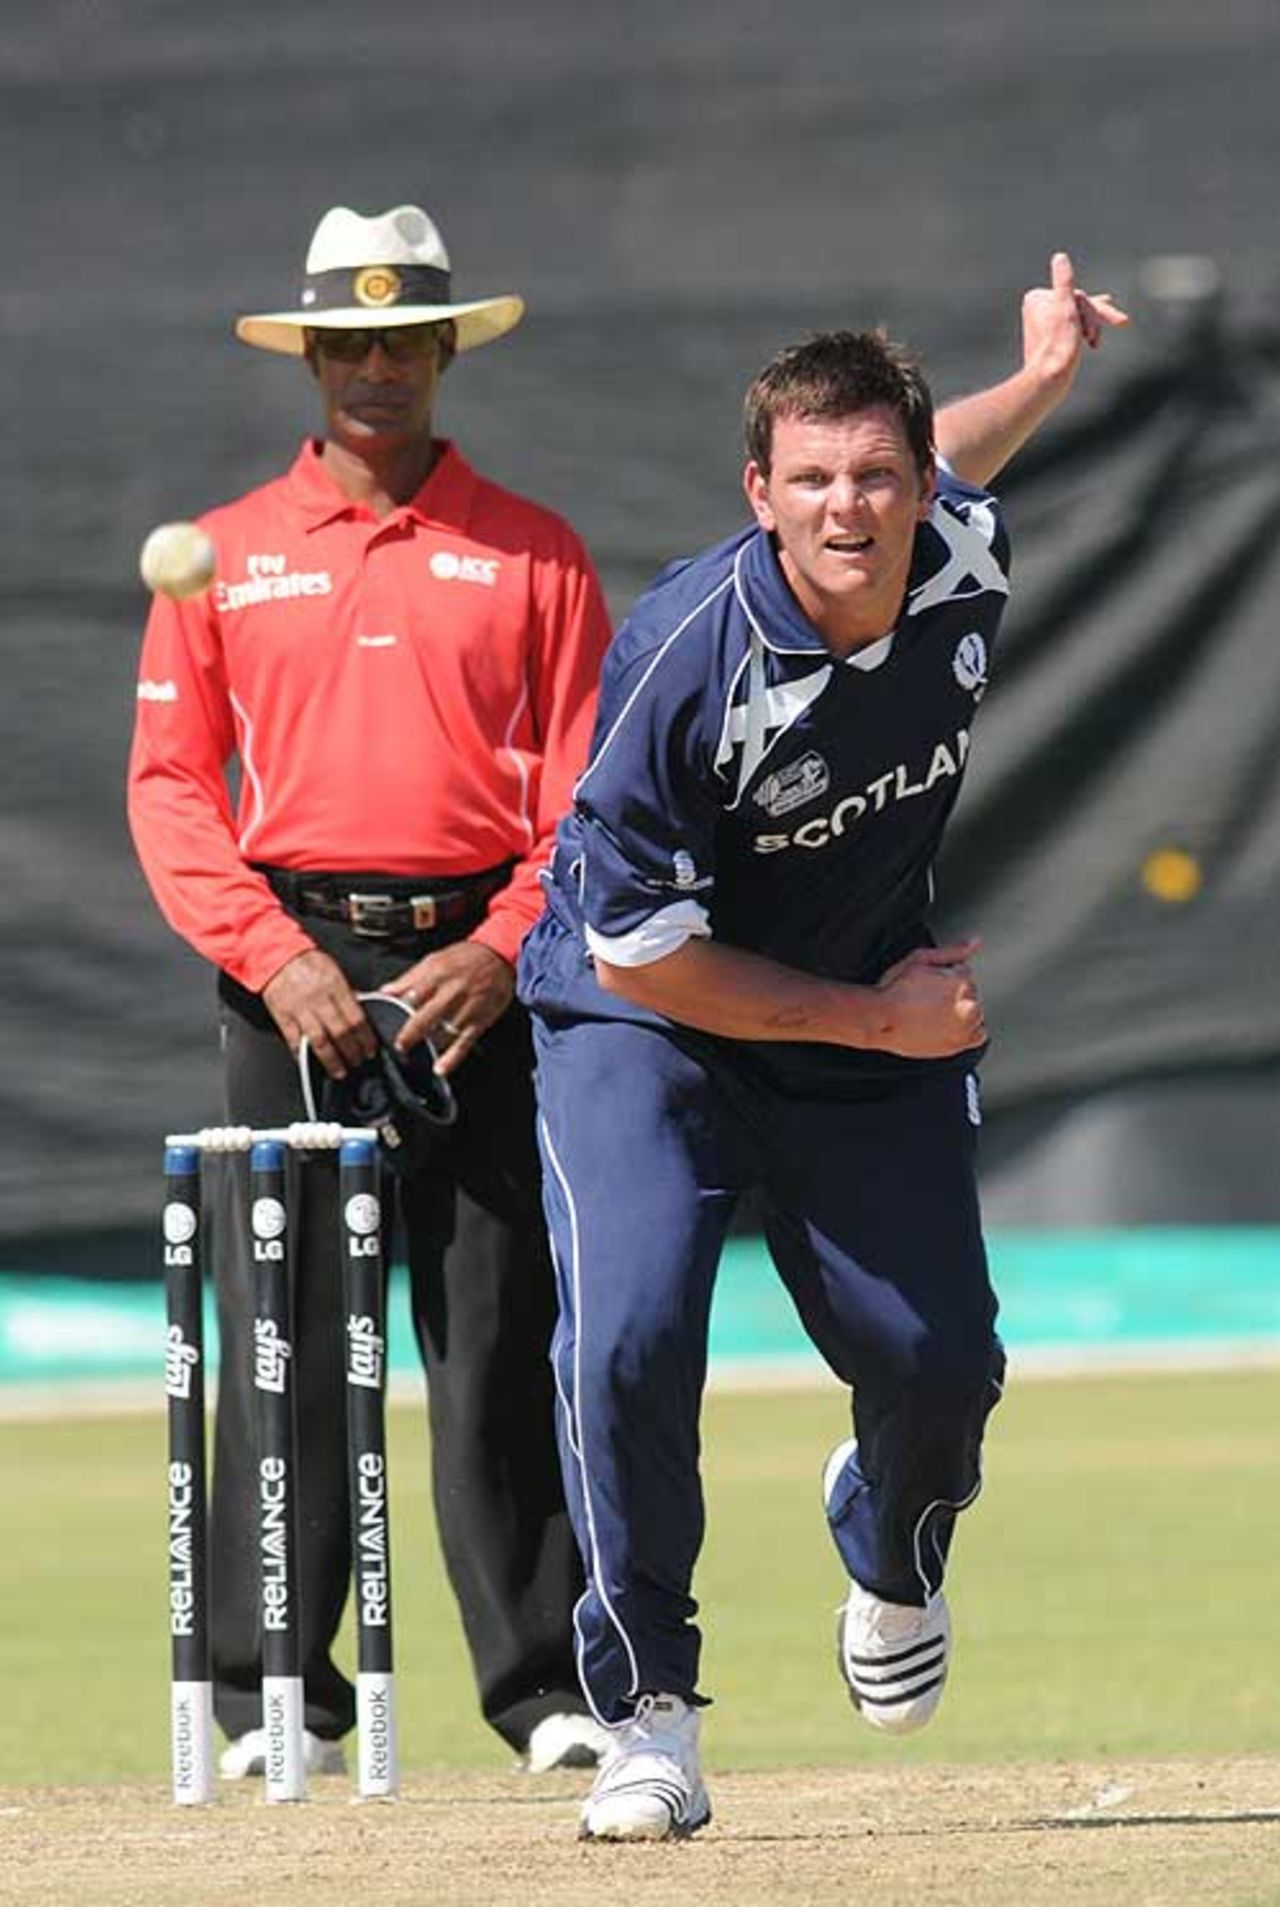 Gordon Drummond bowls against Afghanistan, Afghanistan v Scotland, 5th place play-off, Benoni, April 19, 2009